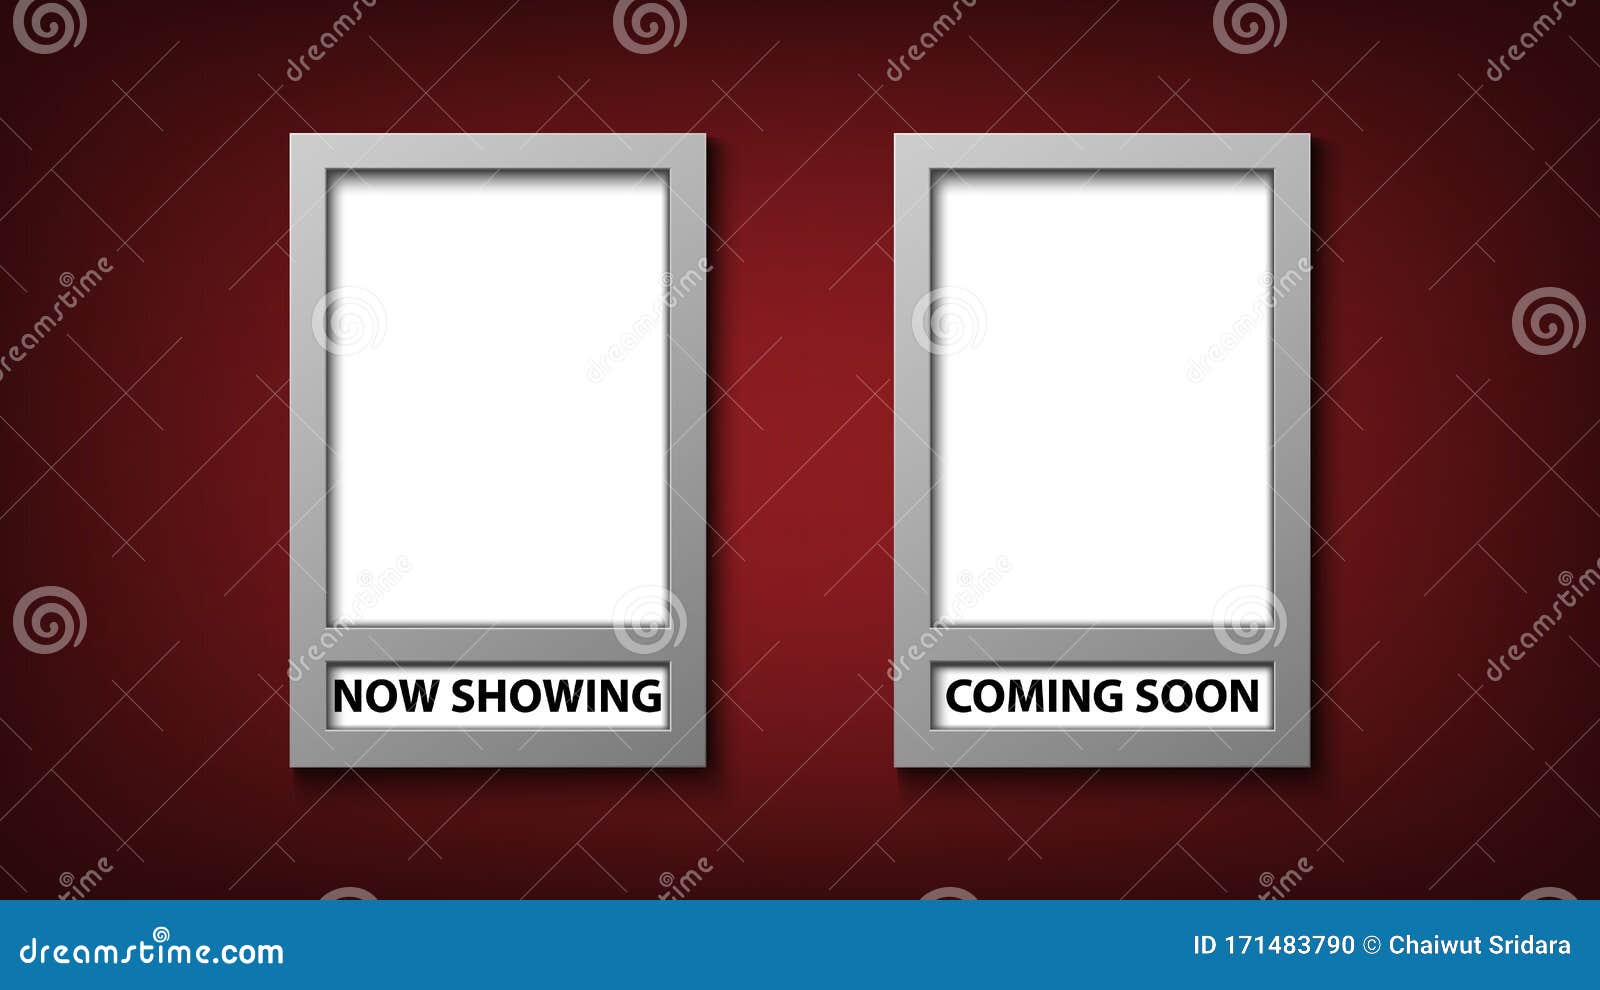 movie poster frame template with now showing and coming soon